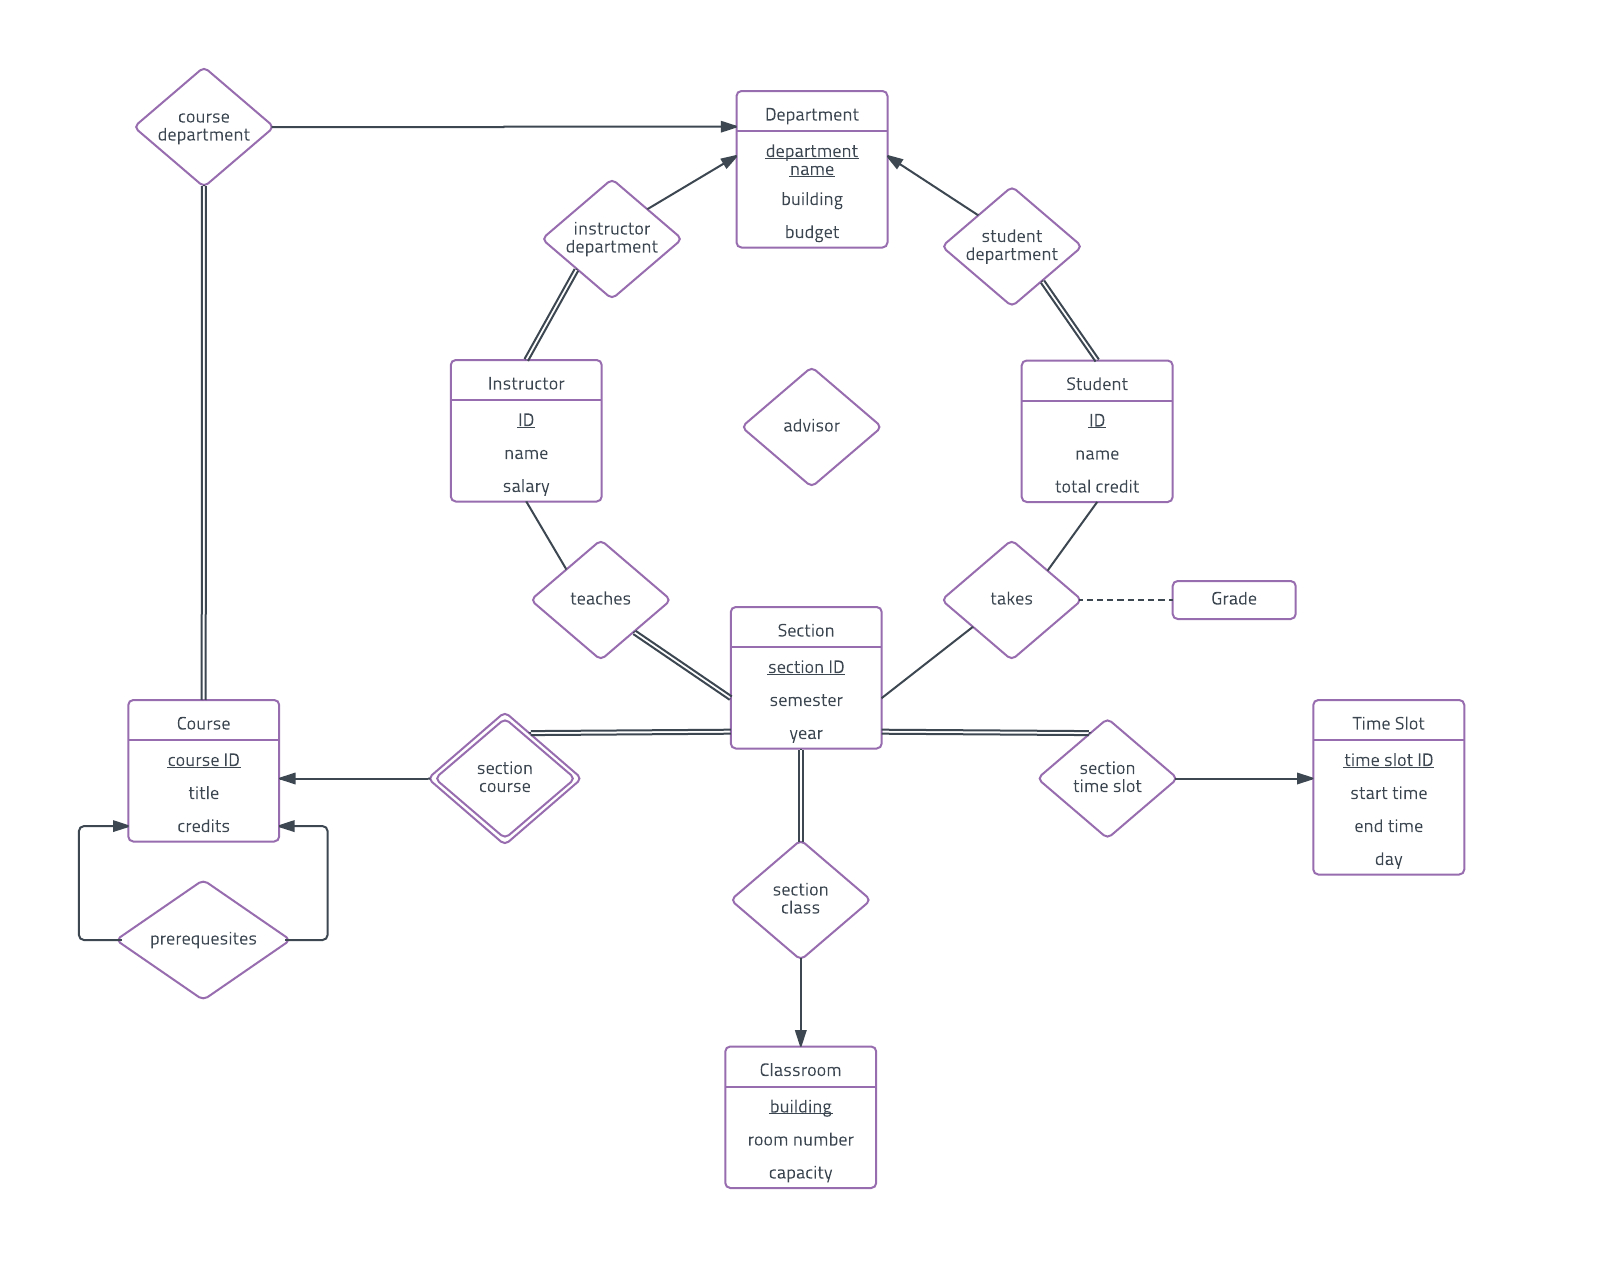 Er Diagram Examples And Templates | Lucidchart pertaining to An Er Diagram For Company Database